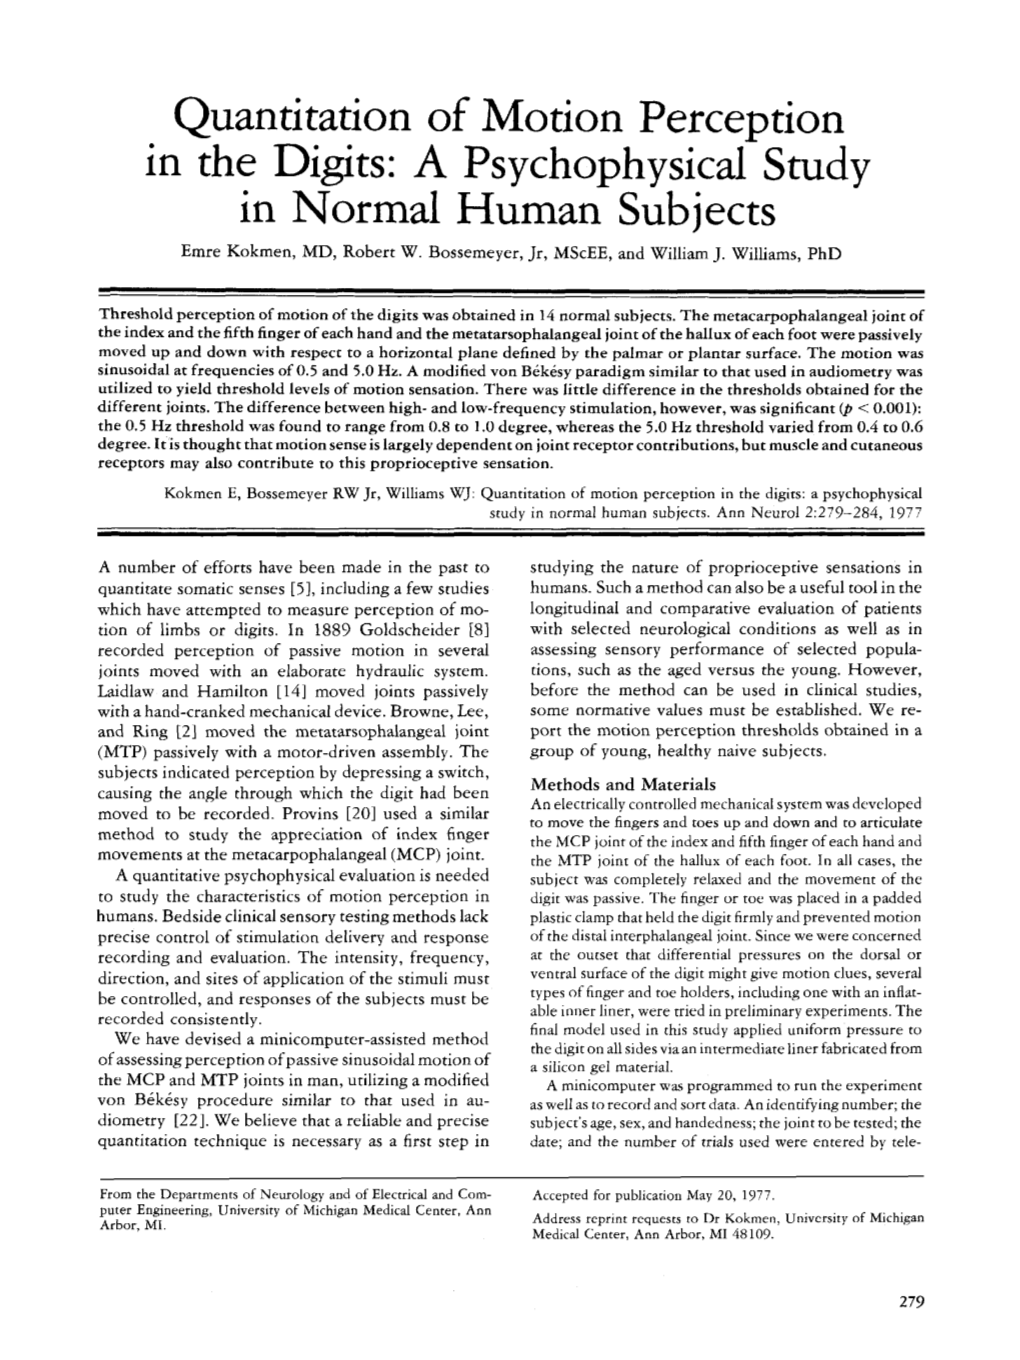 Quantitation of Motion Perception in the Digits: a Psychophysical Study in Normal Human Subjects Emre Kokmen, MD, Robert W